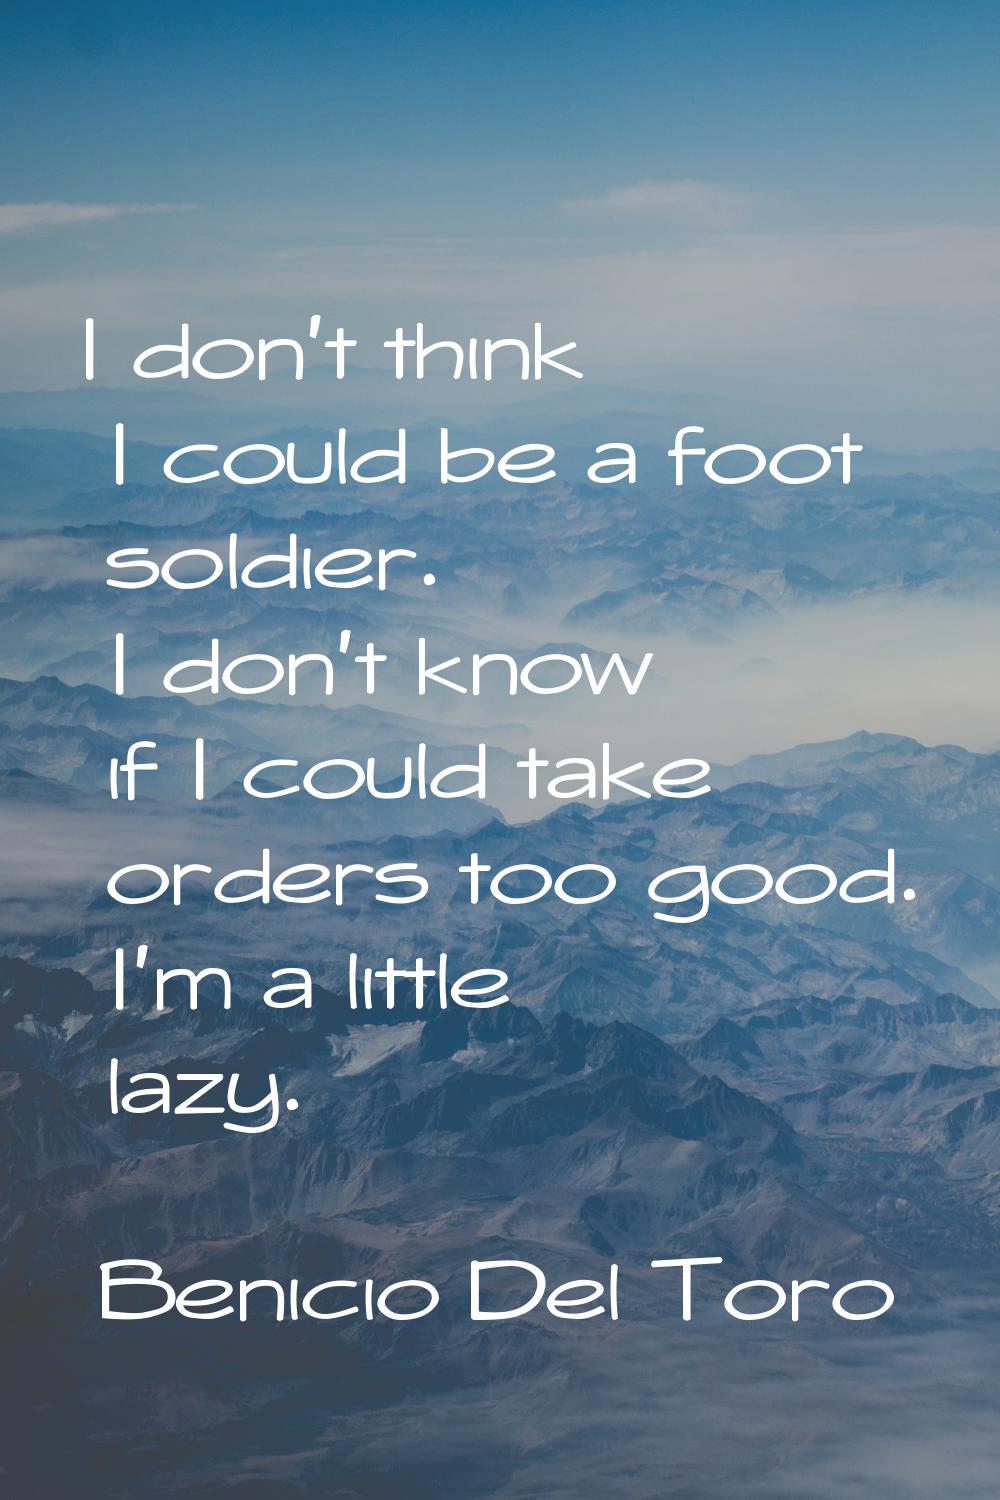 I don't think I could be a foot soldier. I don't know if I could take orders too good. I'm a little